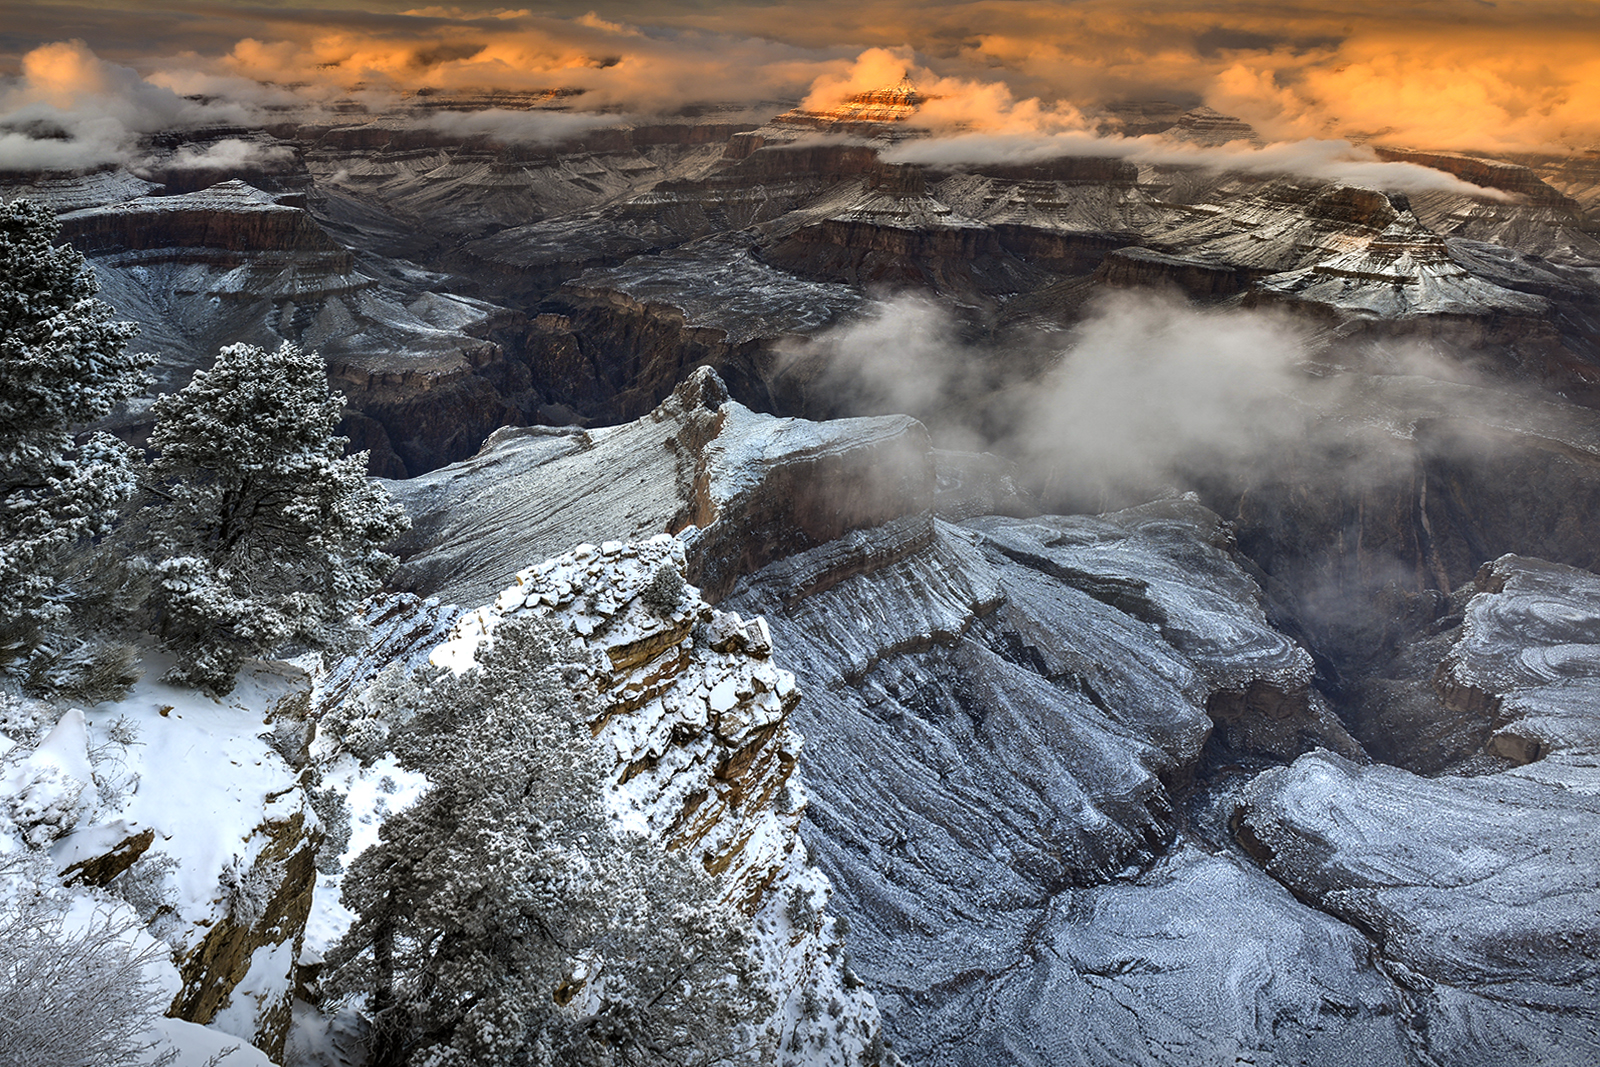 Photo by Glenn Tamblingson  |  A heavy snow blankets the Grand Canyon all the way to the Colorado River taken at Hopi Point